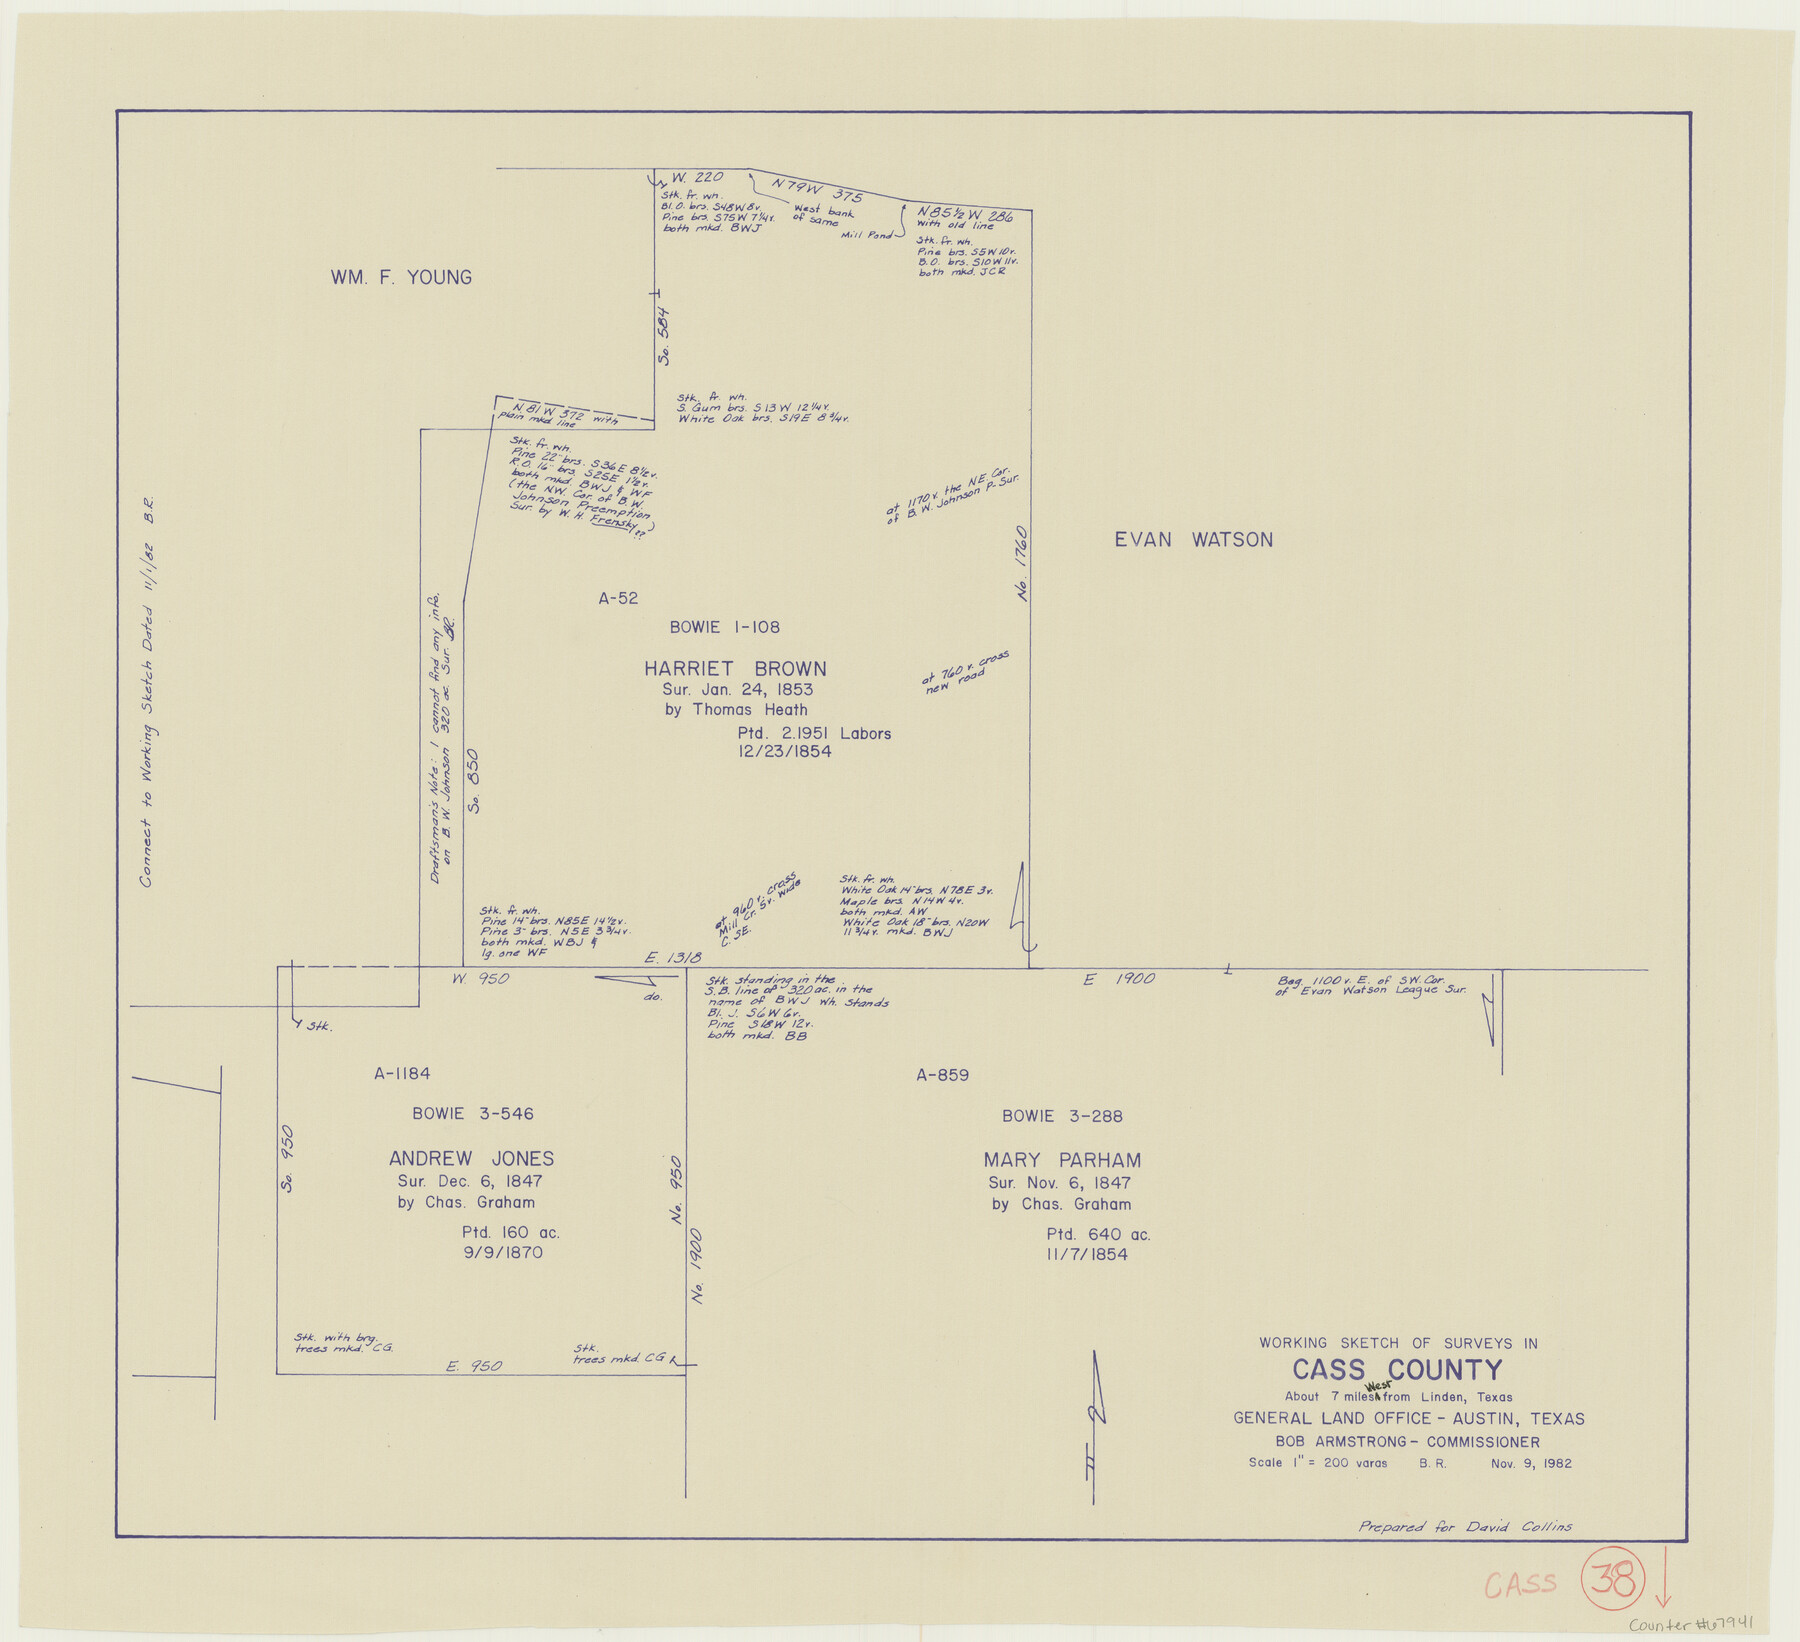 67941, Cass County Working Sketch 38, General Map Collection